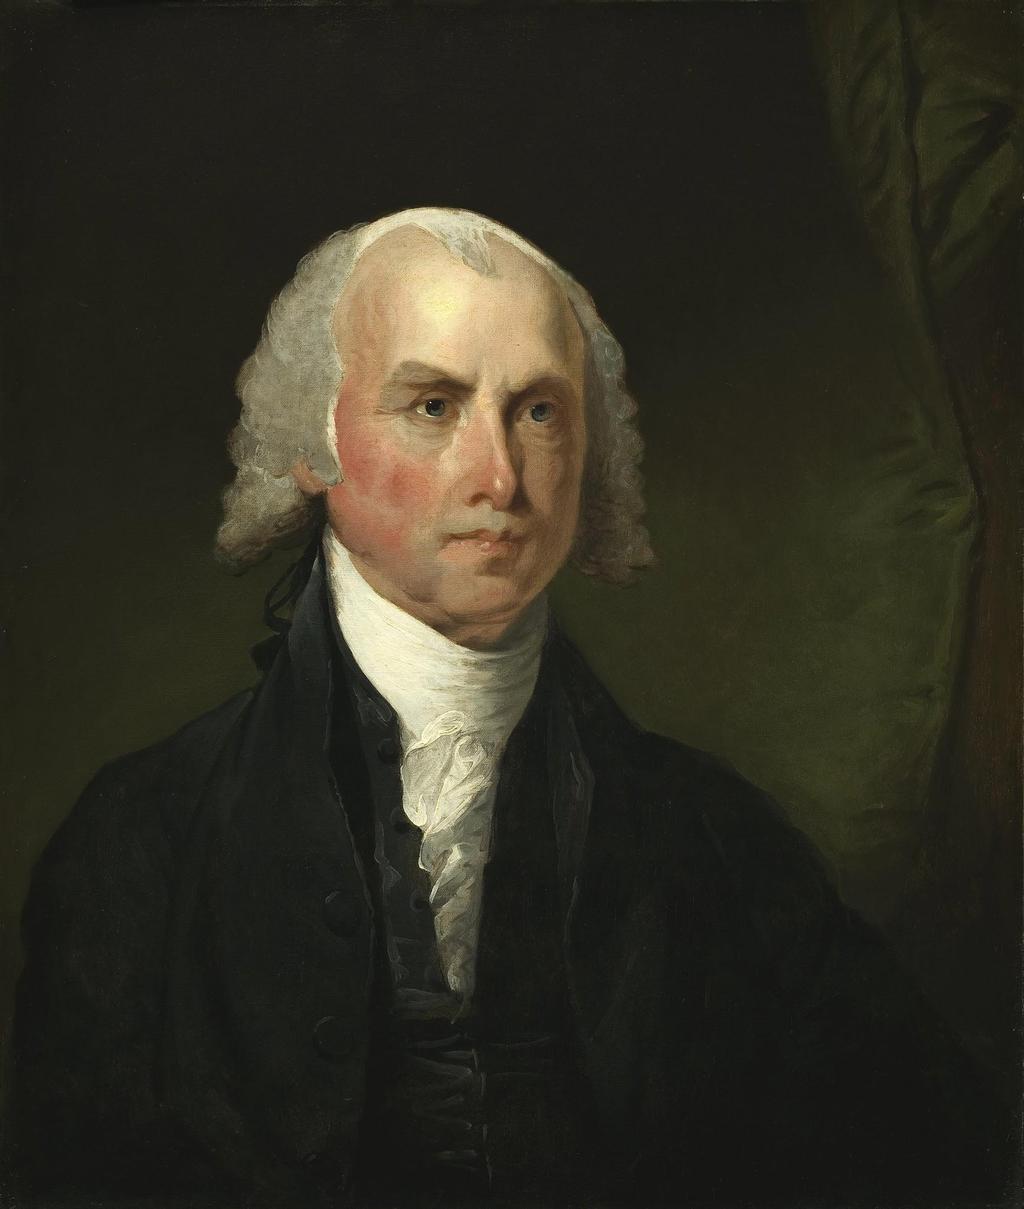 Mr. Madison s War In June 1812, Congress and President